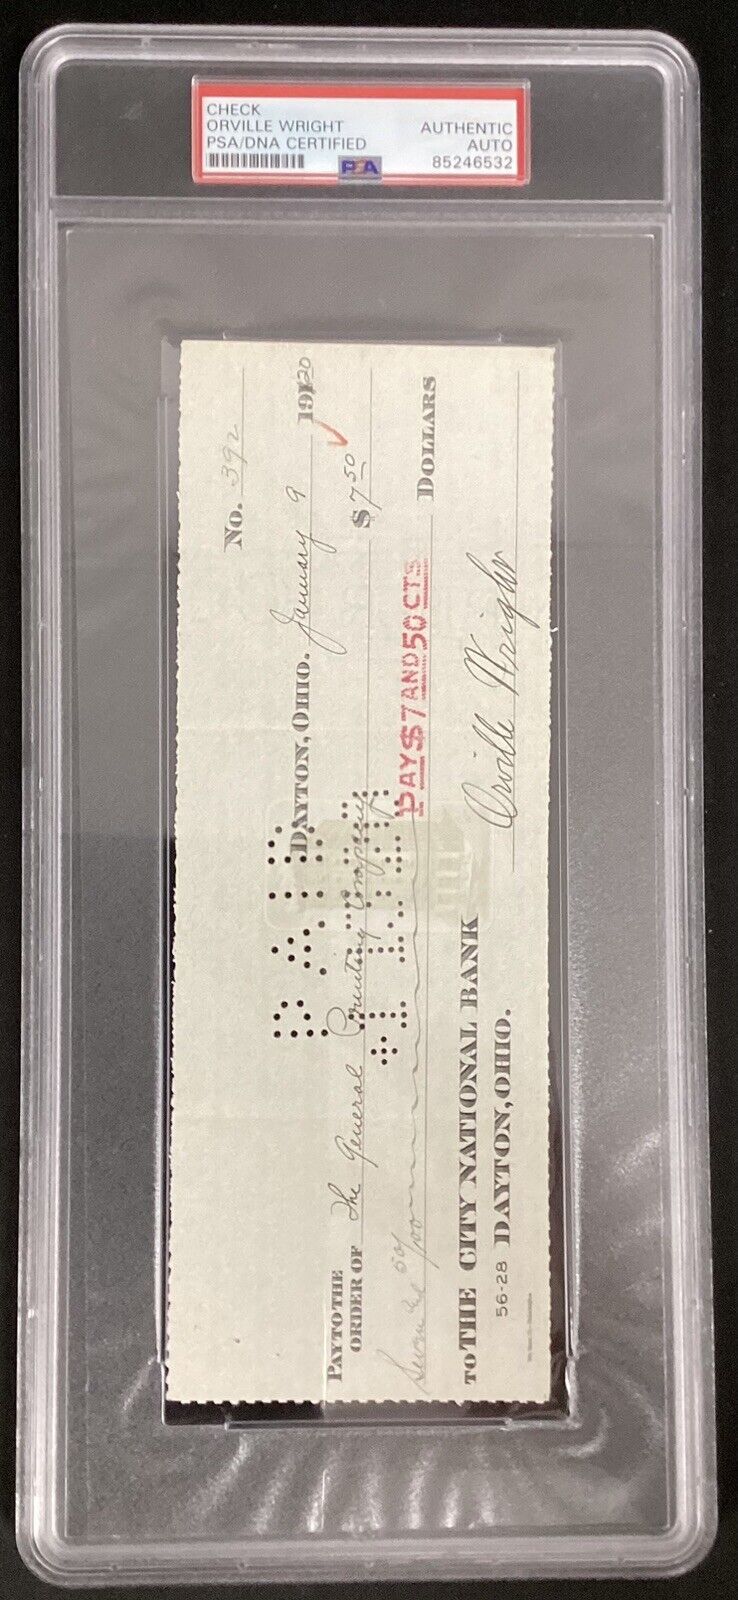 Orville Wright Signed Check The Wright Brothers First Airplane Auto PSA/DNA